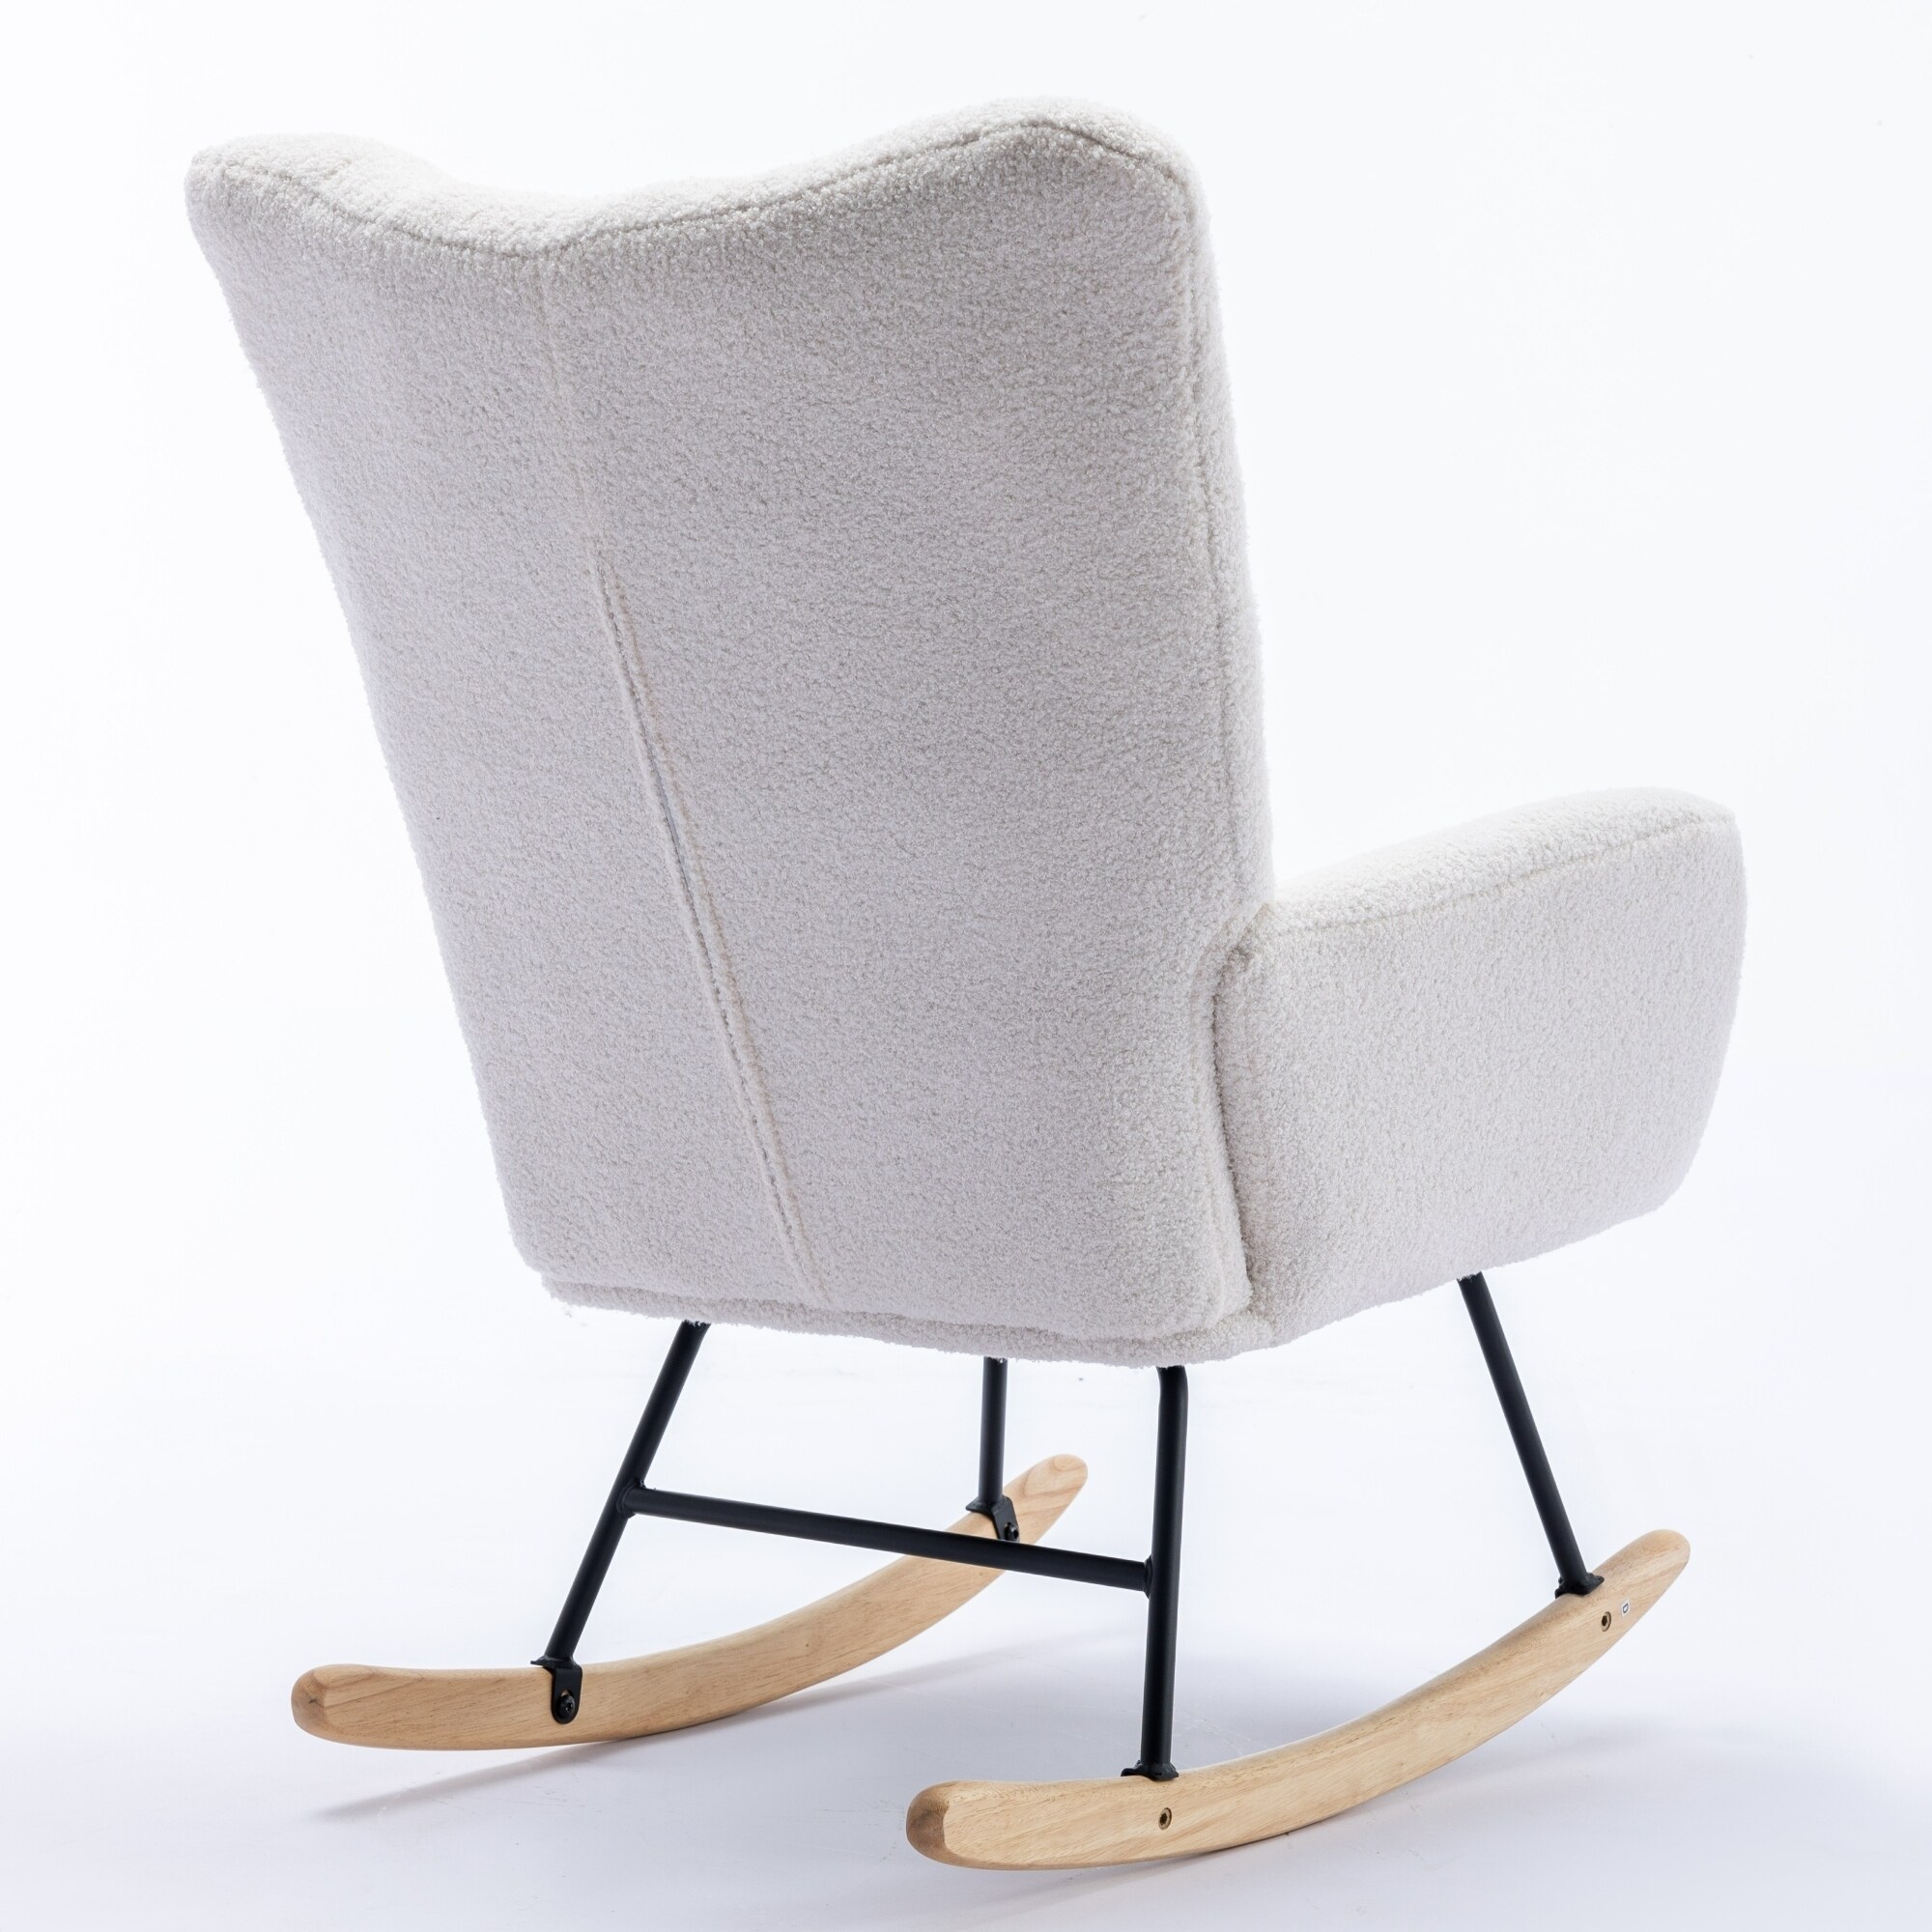 https://ak1.ostkcdn.com/images/products/is/images/direct/c85b18e9bc3c4715f697456b39a690295ae82e25/Rocking-Chair%2C-Soft-Teddy-Fabric-Rocking-Chair-%2C-Glider-Rocker-with-Safe-Solid-Wood-Base-for-Living-Room-%28green%29.jpg